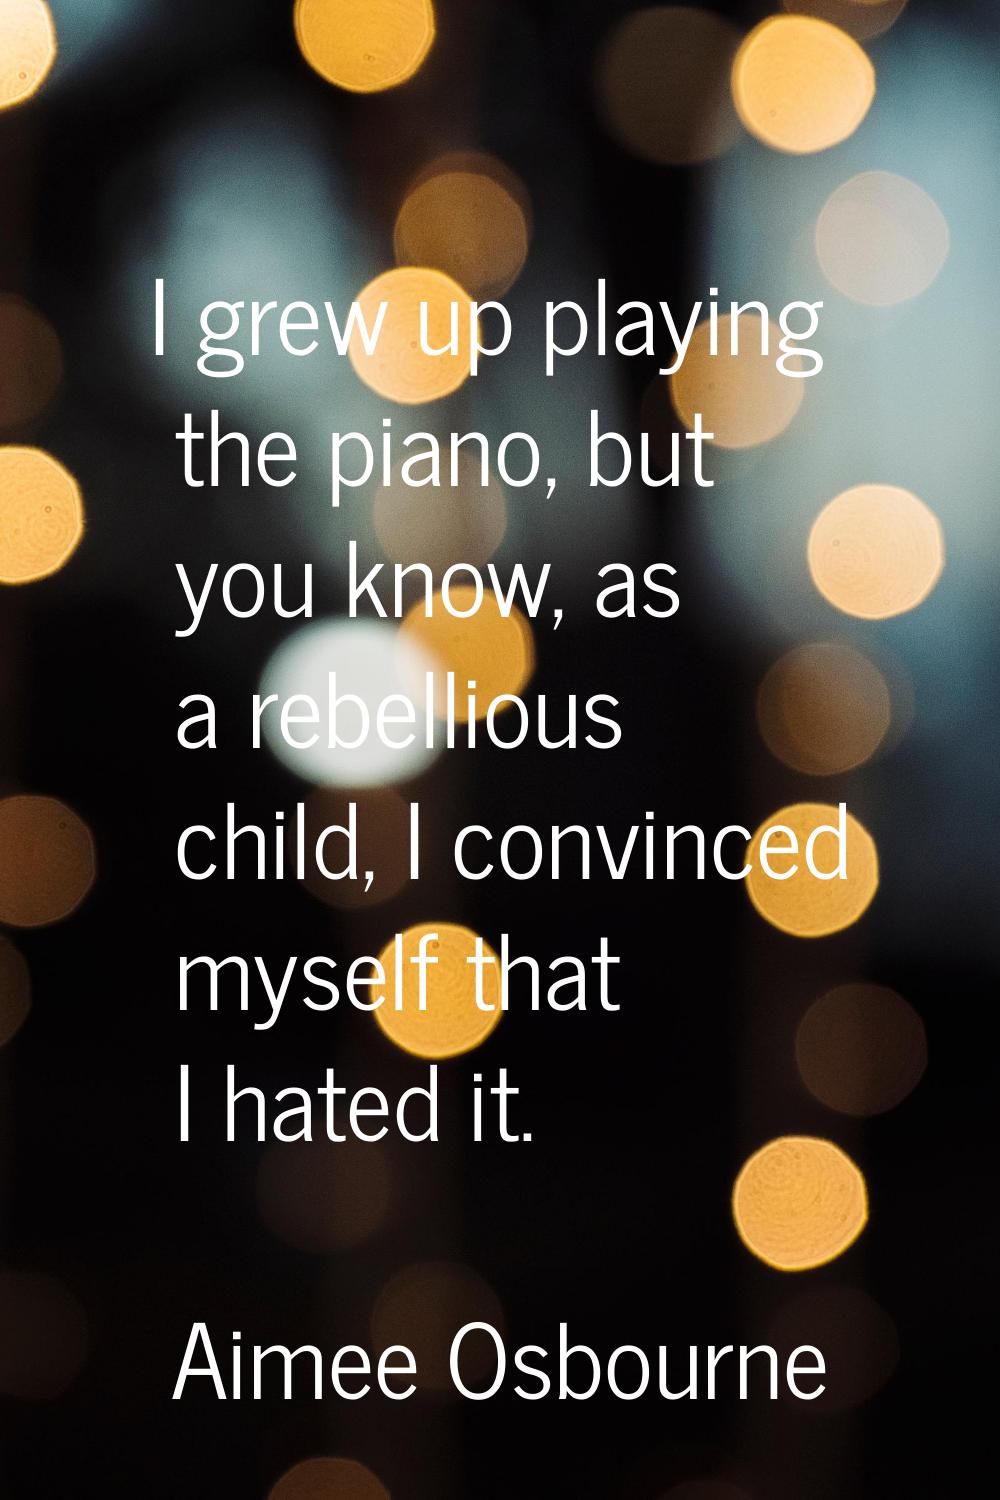 I grew up playing the piano, but you know, as a rebellious child, I convinced myself that I hated i